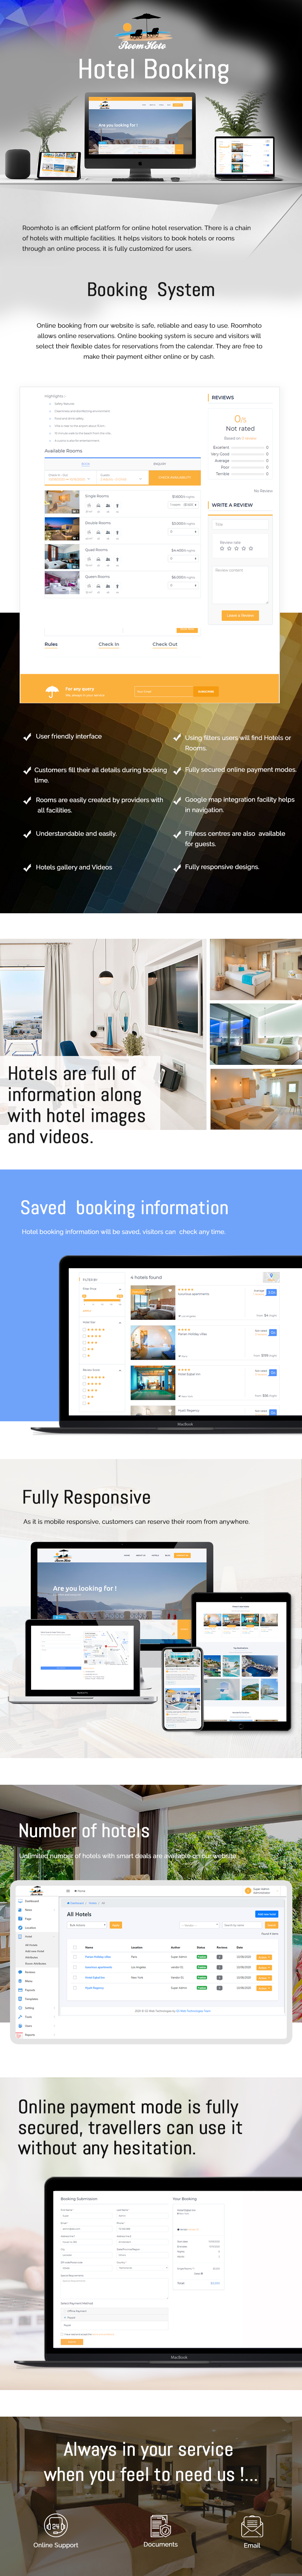 Room Hoto - A Hotel Booking Engine